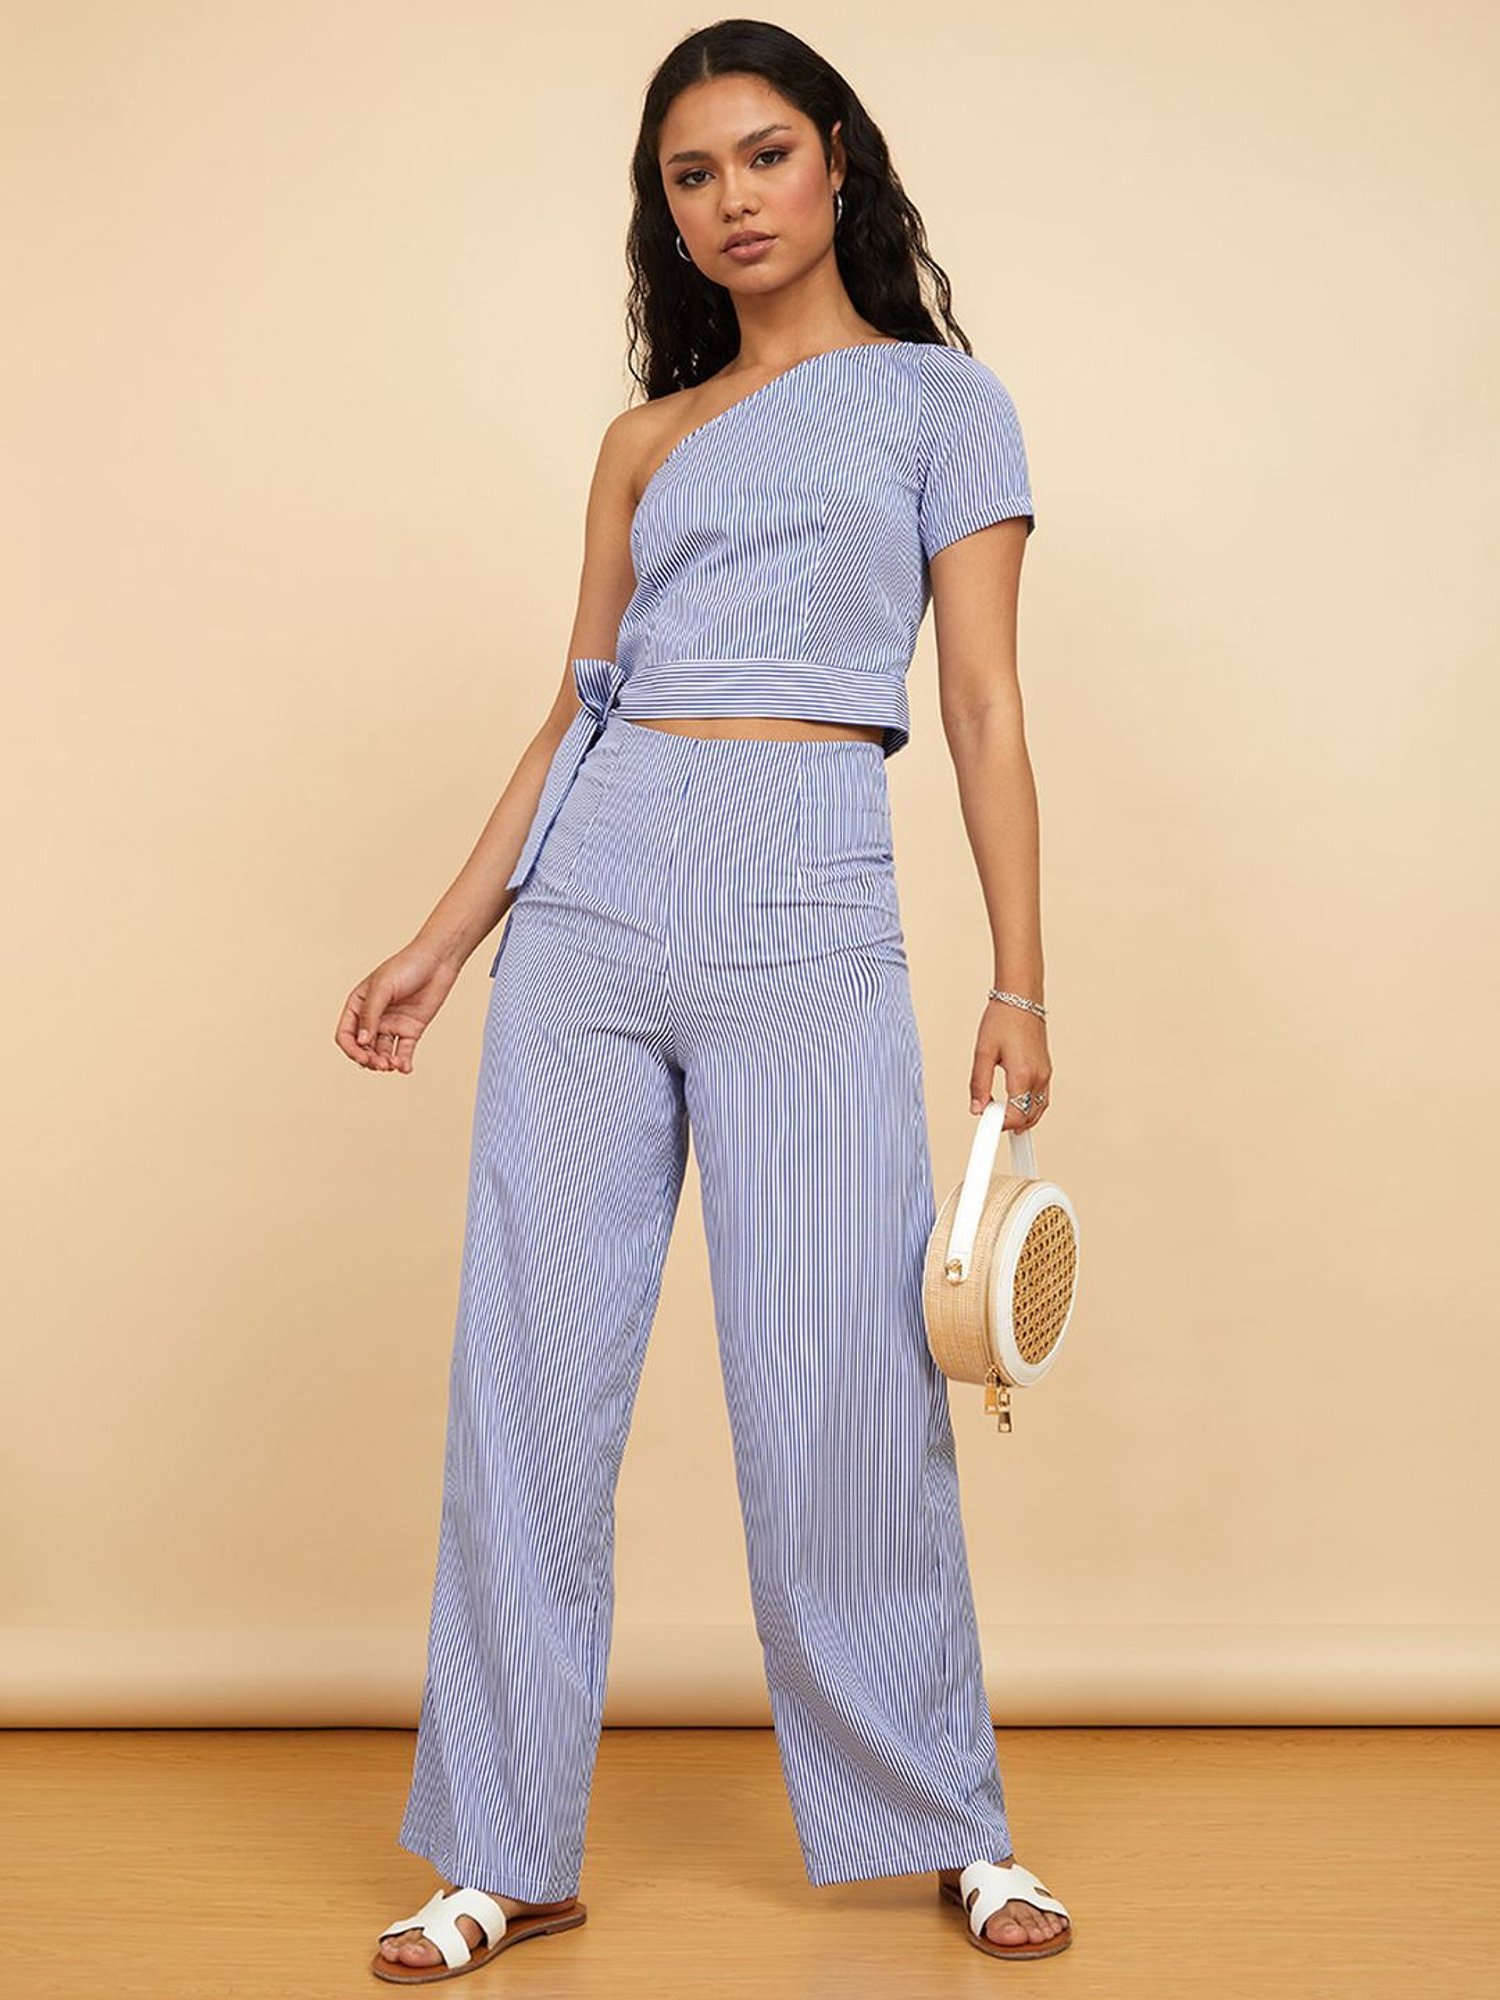 Gabriella Demetriades Is Spring Chic In Her Strap Crop Top And High Waist  Trousers